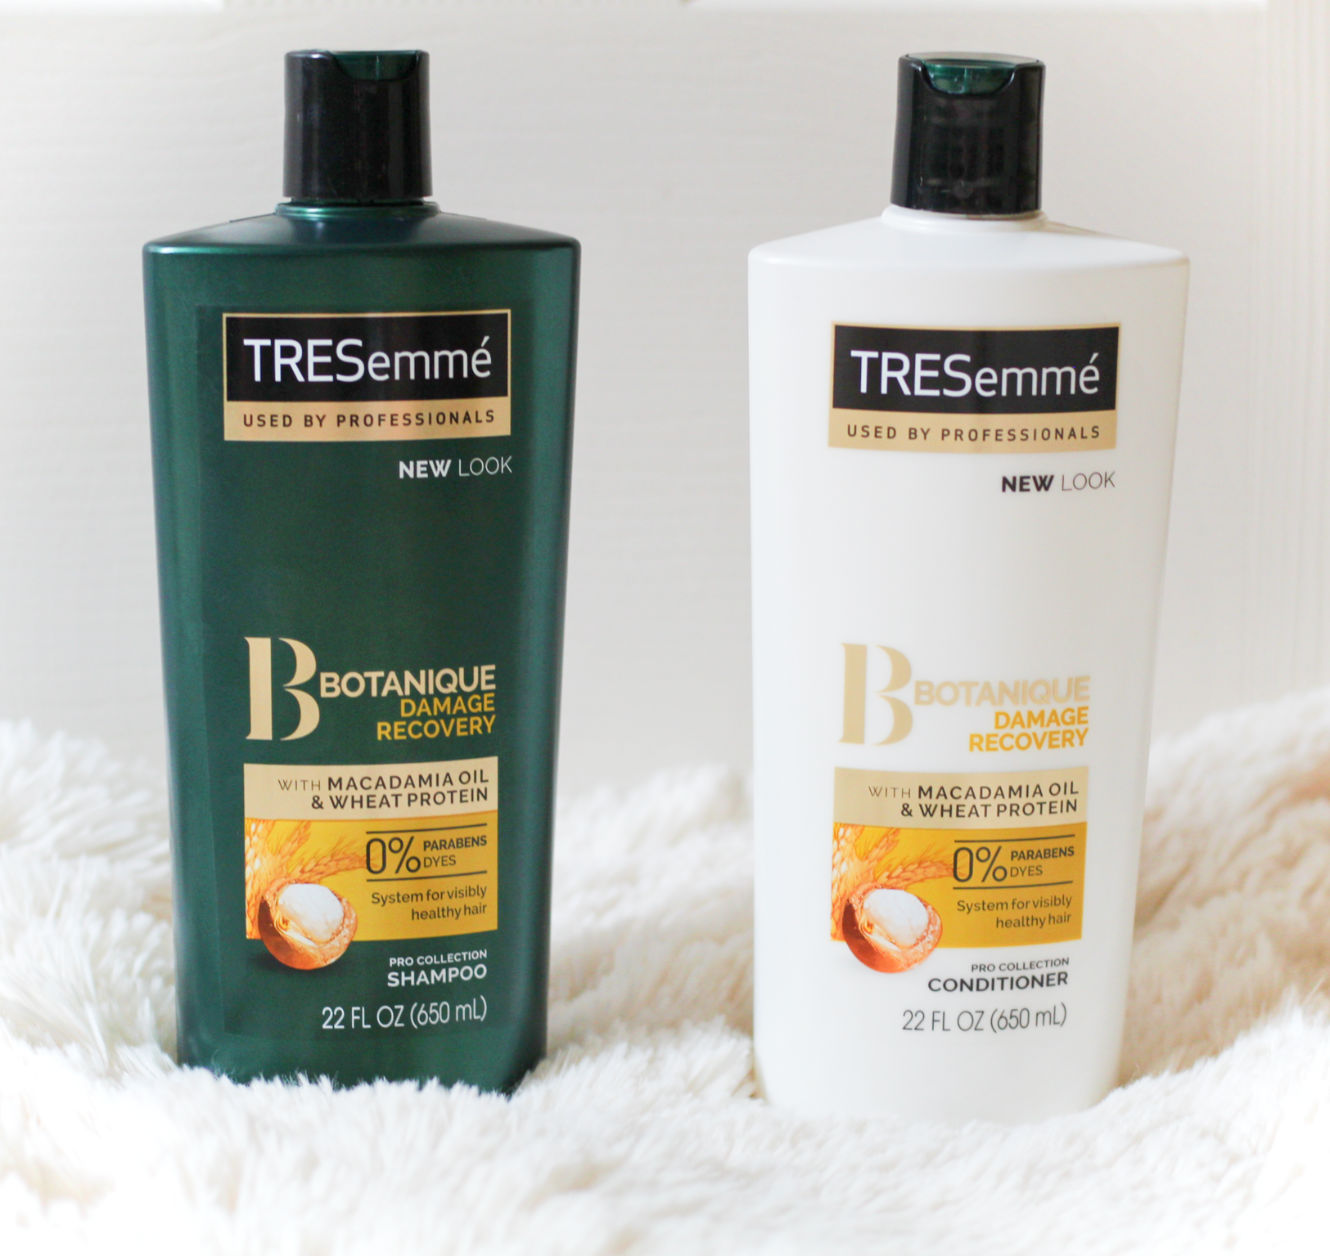 A Good Shampoo And Conditioner #beauty #hair